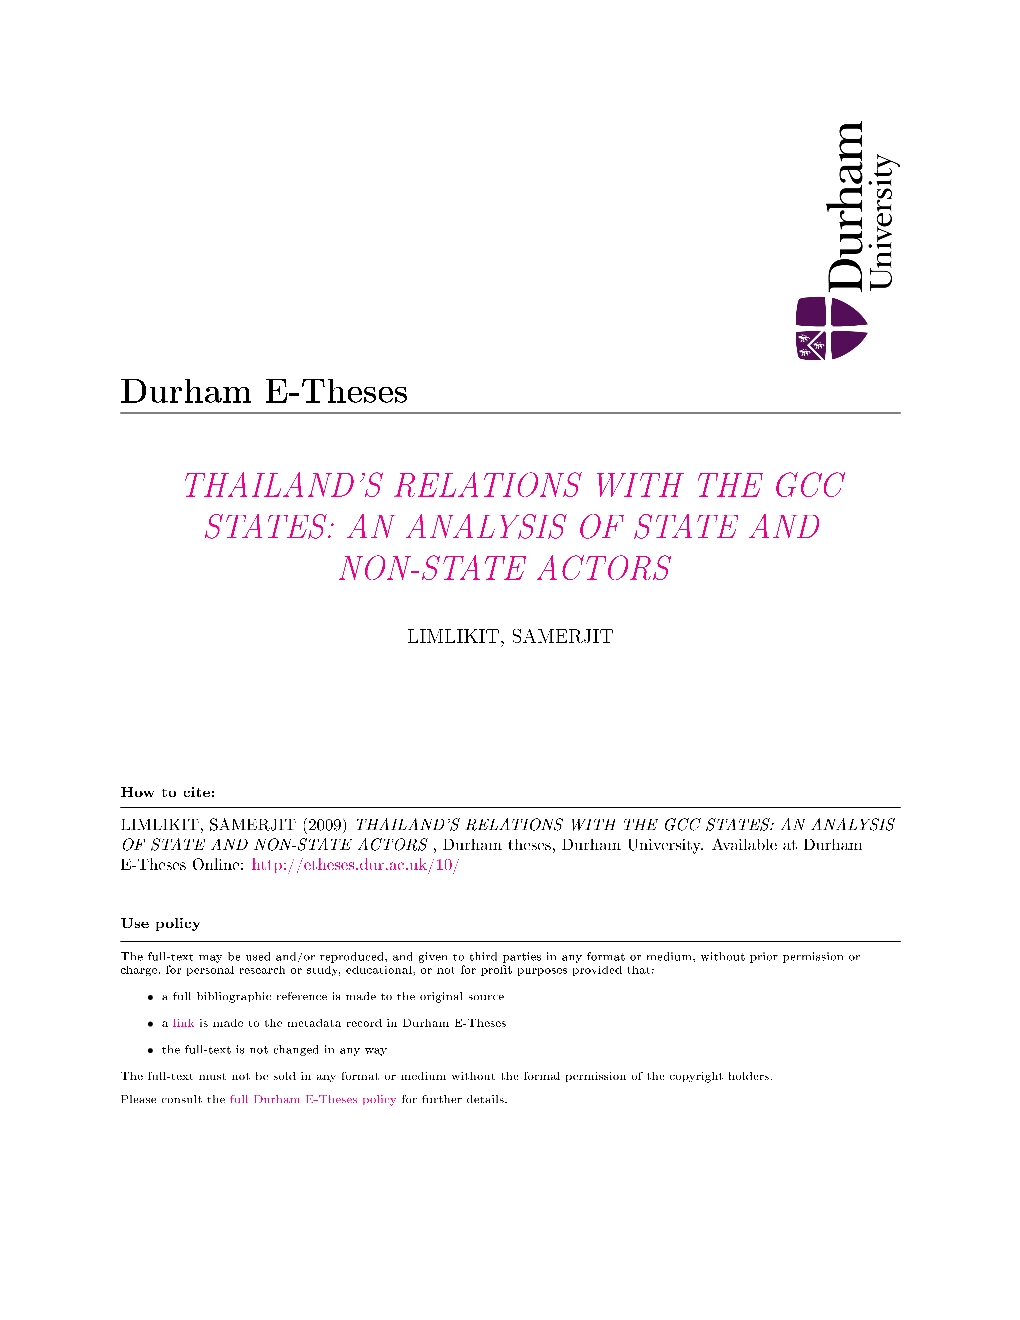 Thailand's Relations with the Gcc States: an Analysis of State and Non-State Actors